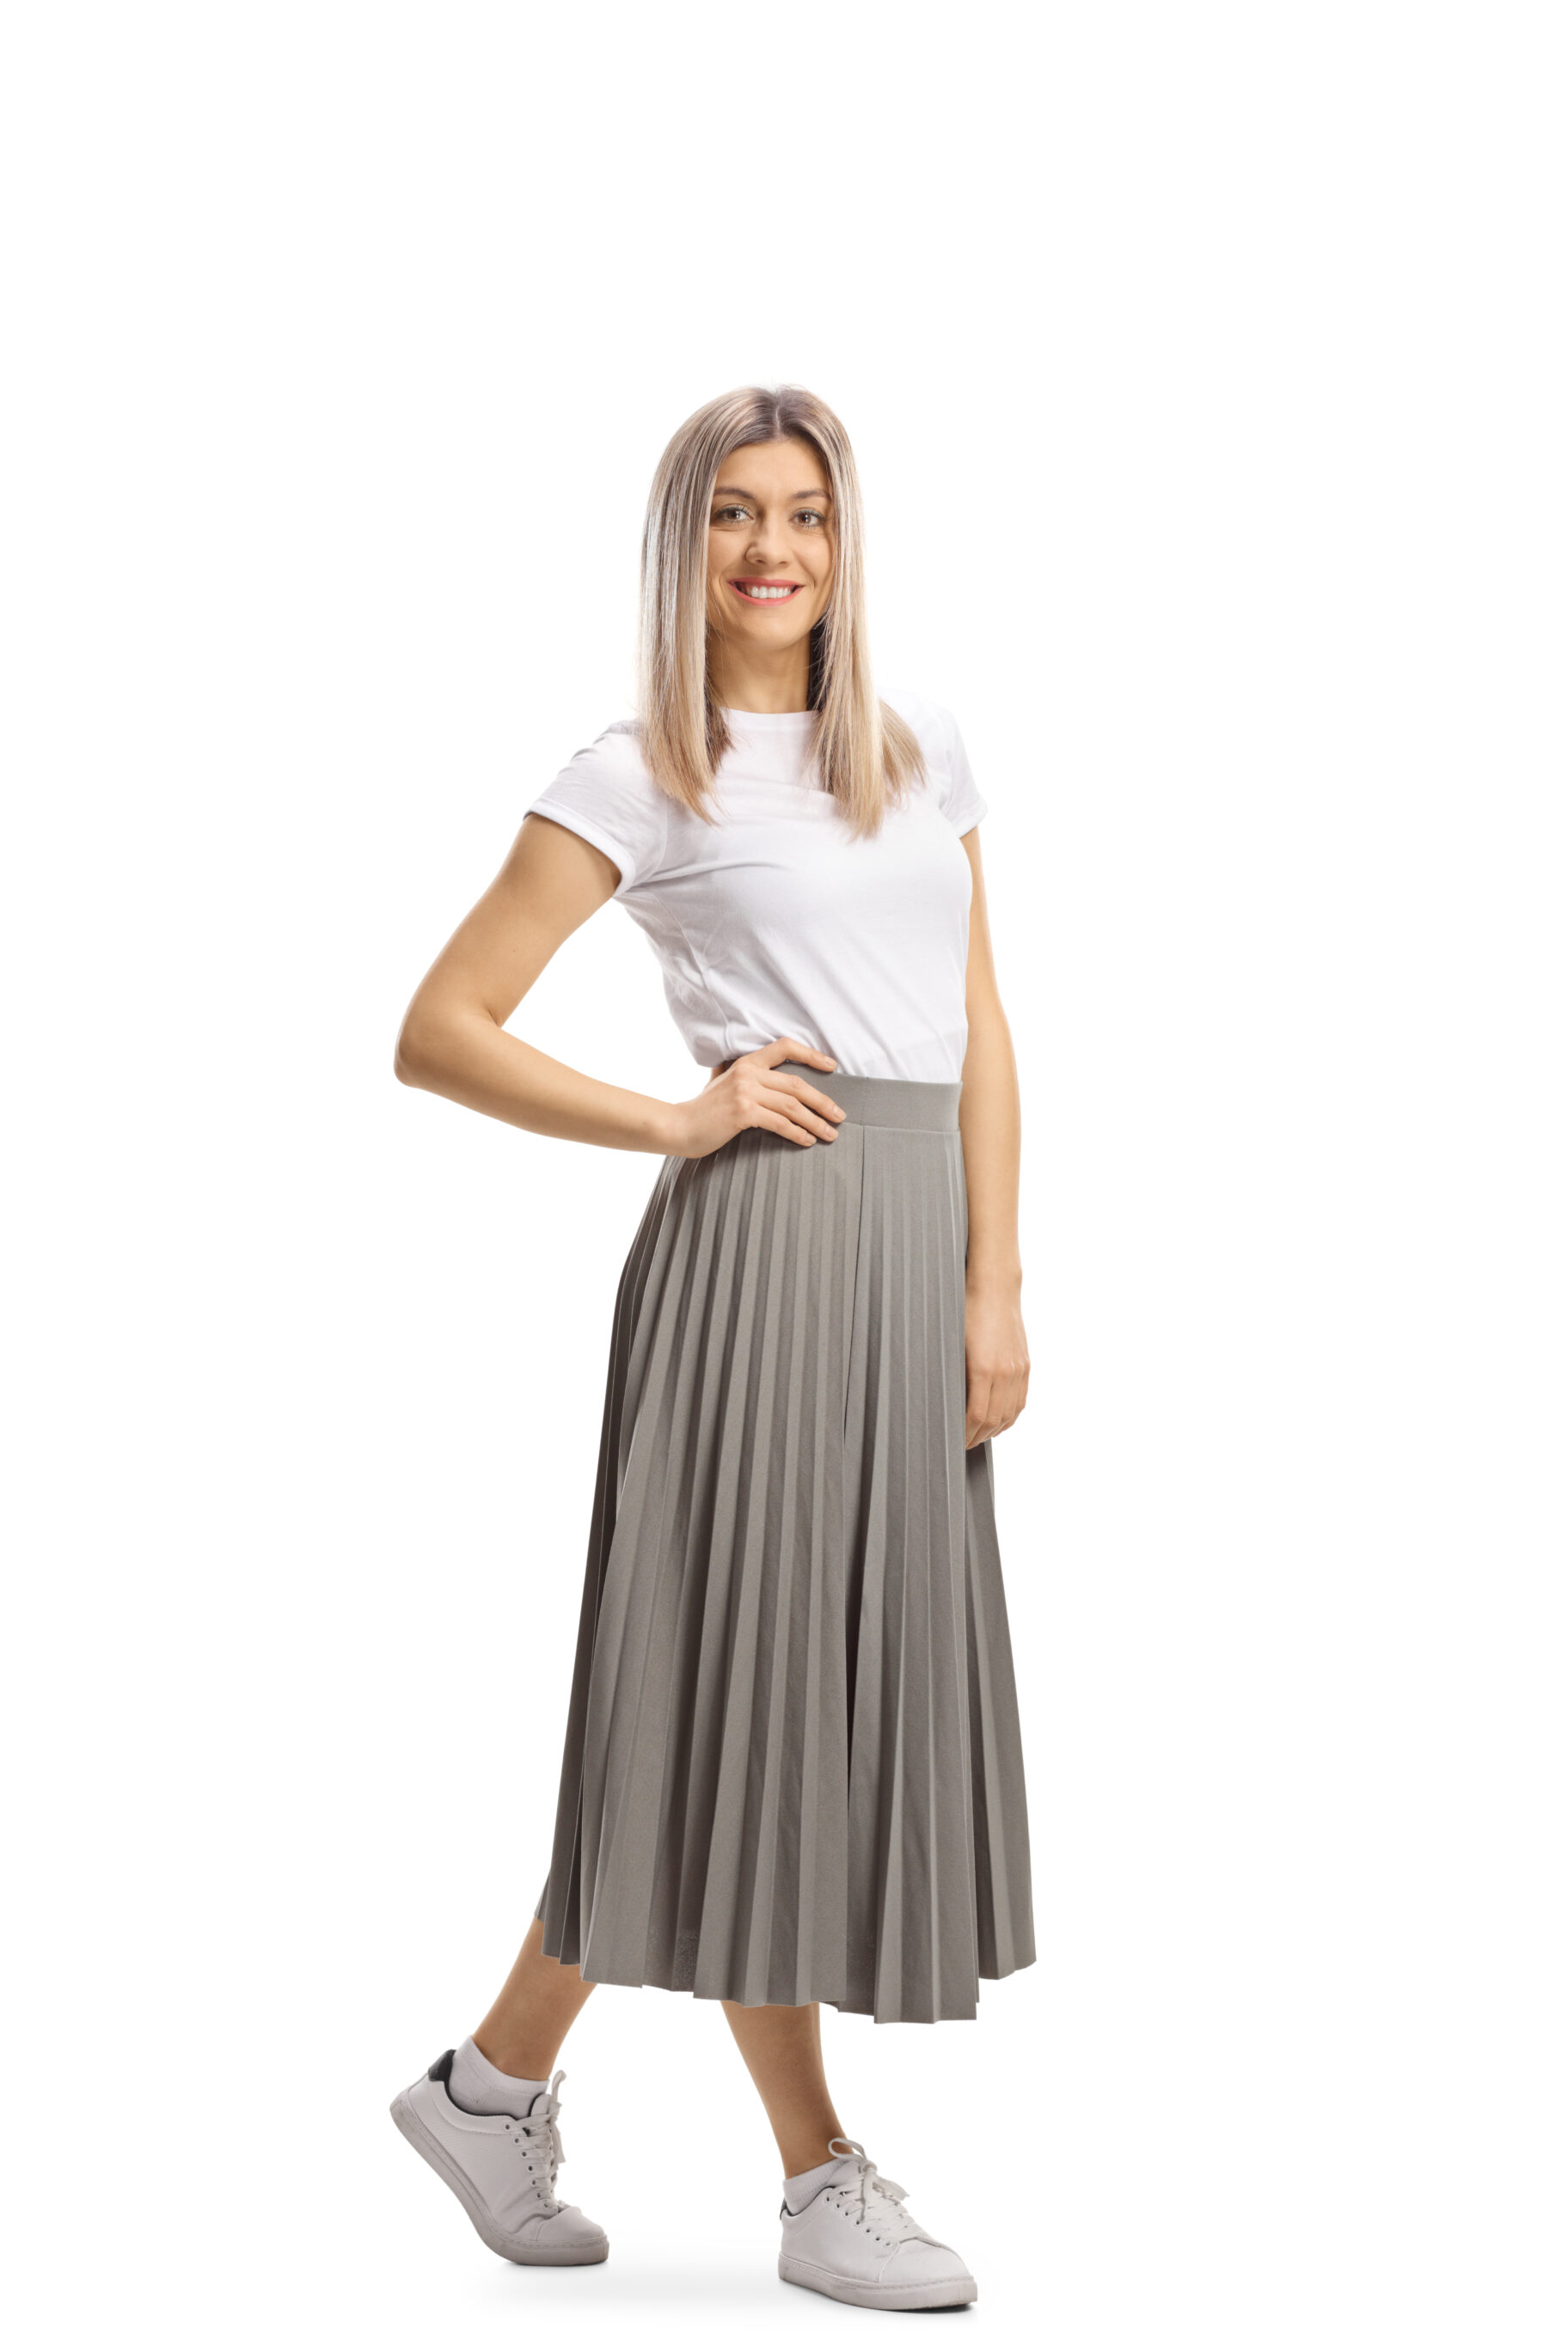 The Pleated Skirt + T-Shirt